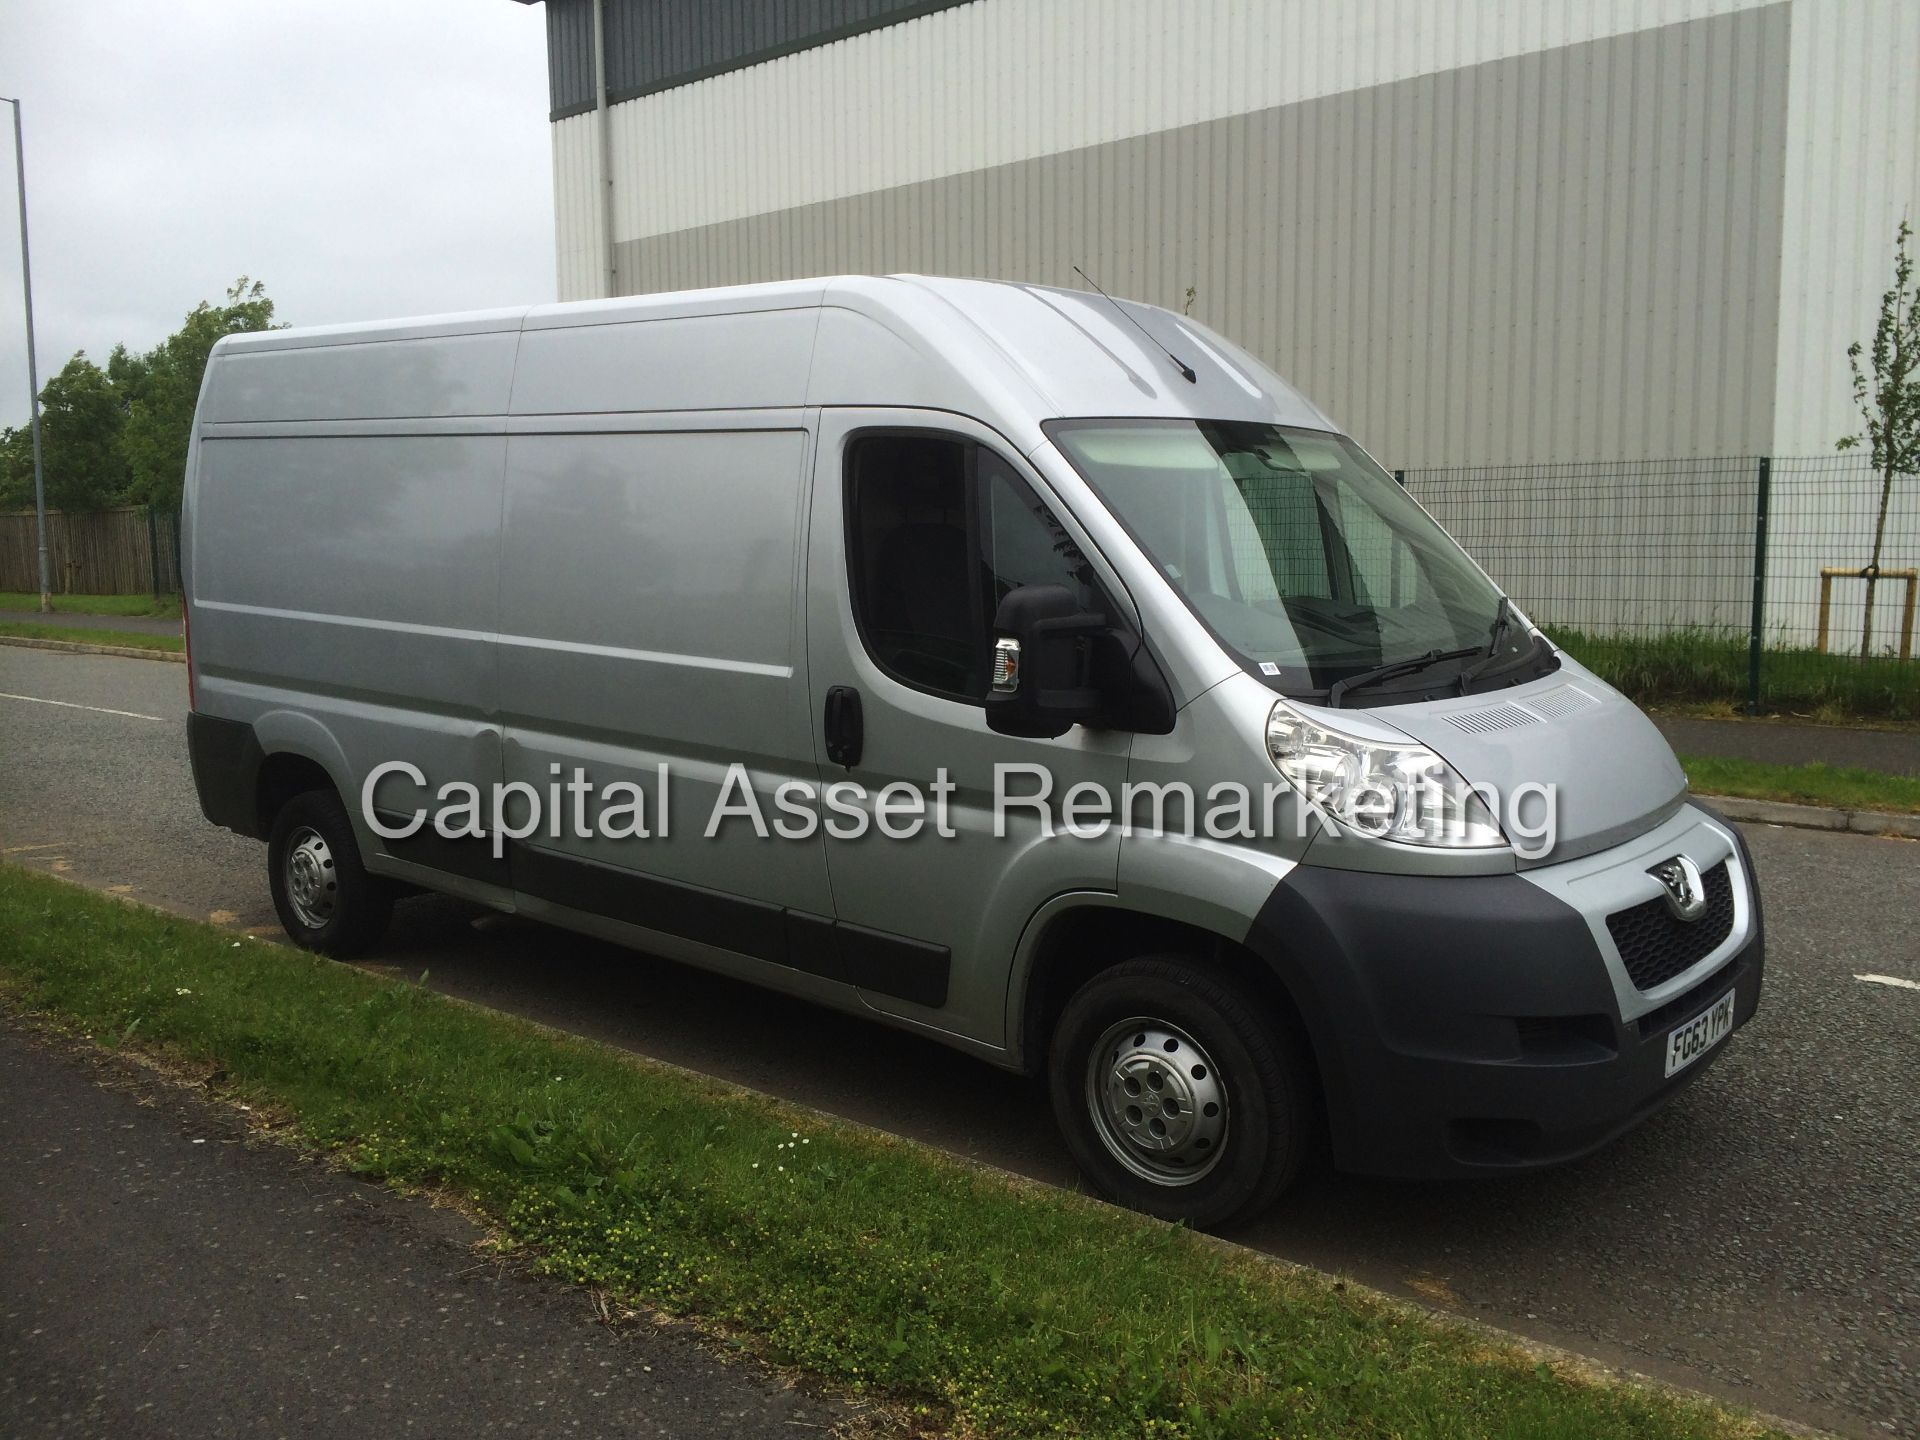 PEUGEOT BOXER LONG WHEEL BASE HI TOP- 2.2HDI "PROFESSIONAL - 6 SPEED -1 OWNER FROM NEW -2014 MODEL